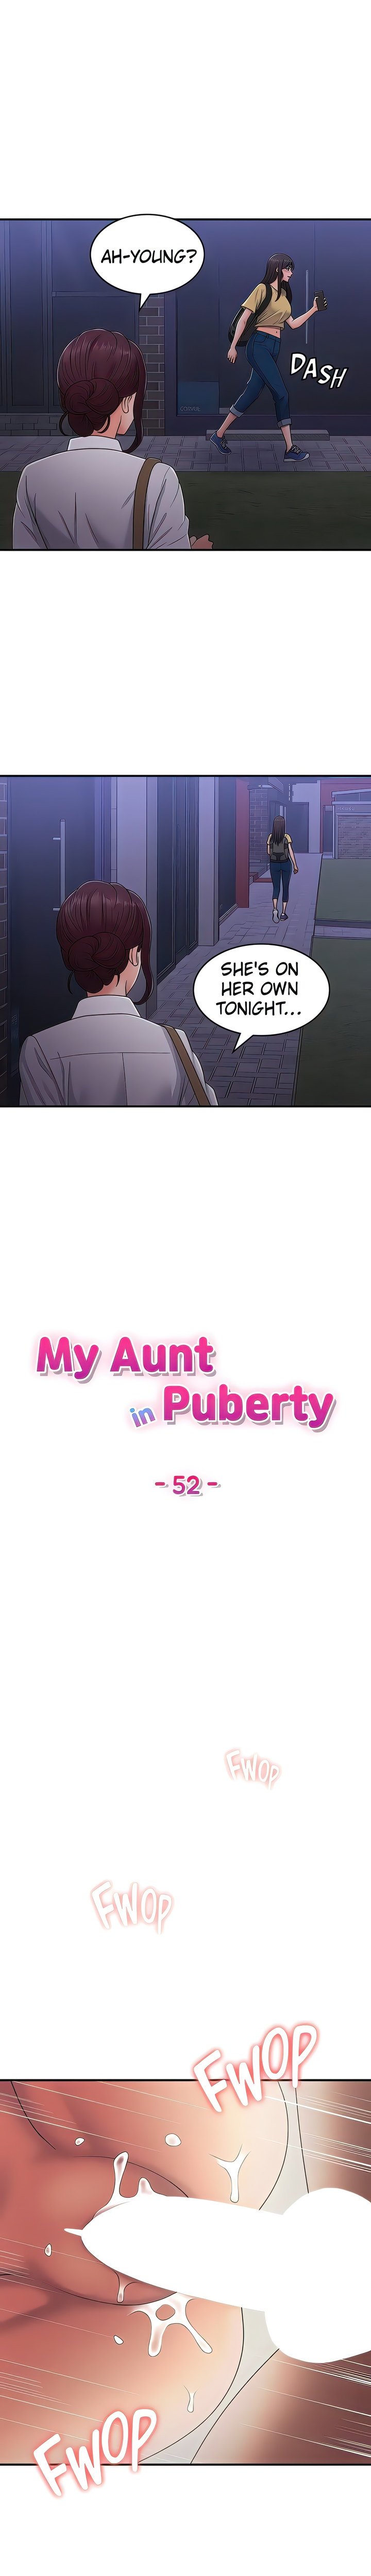 my-aunt-in-puberty-chap-52-2